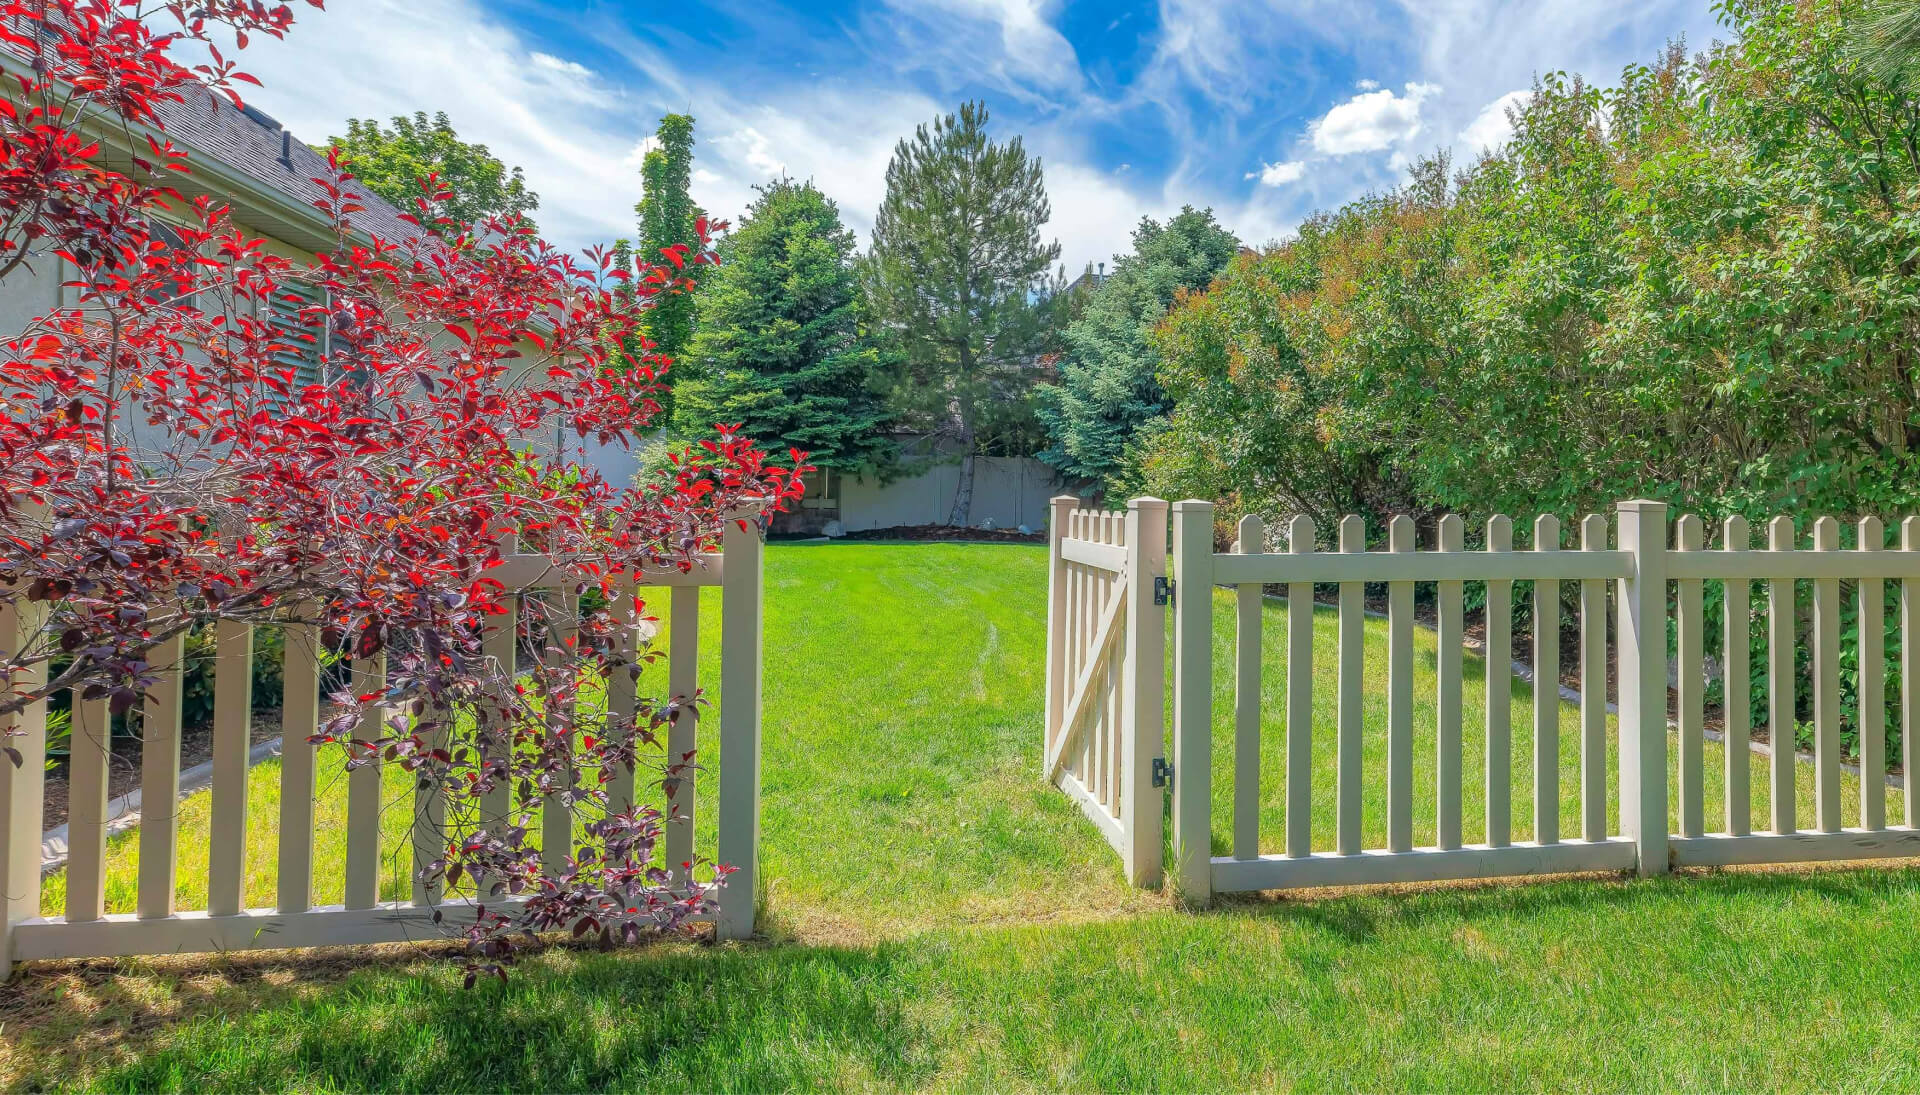 A functional fence gate providing access to a well-maintained backyard, surrounded by a wooden fence in Lubbock